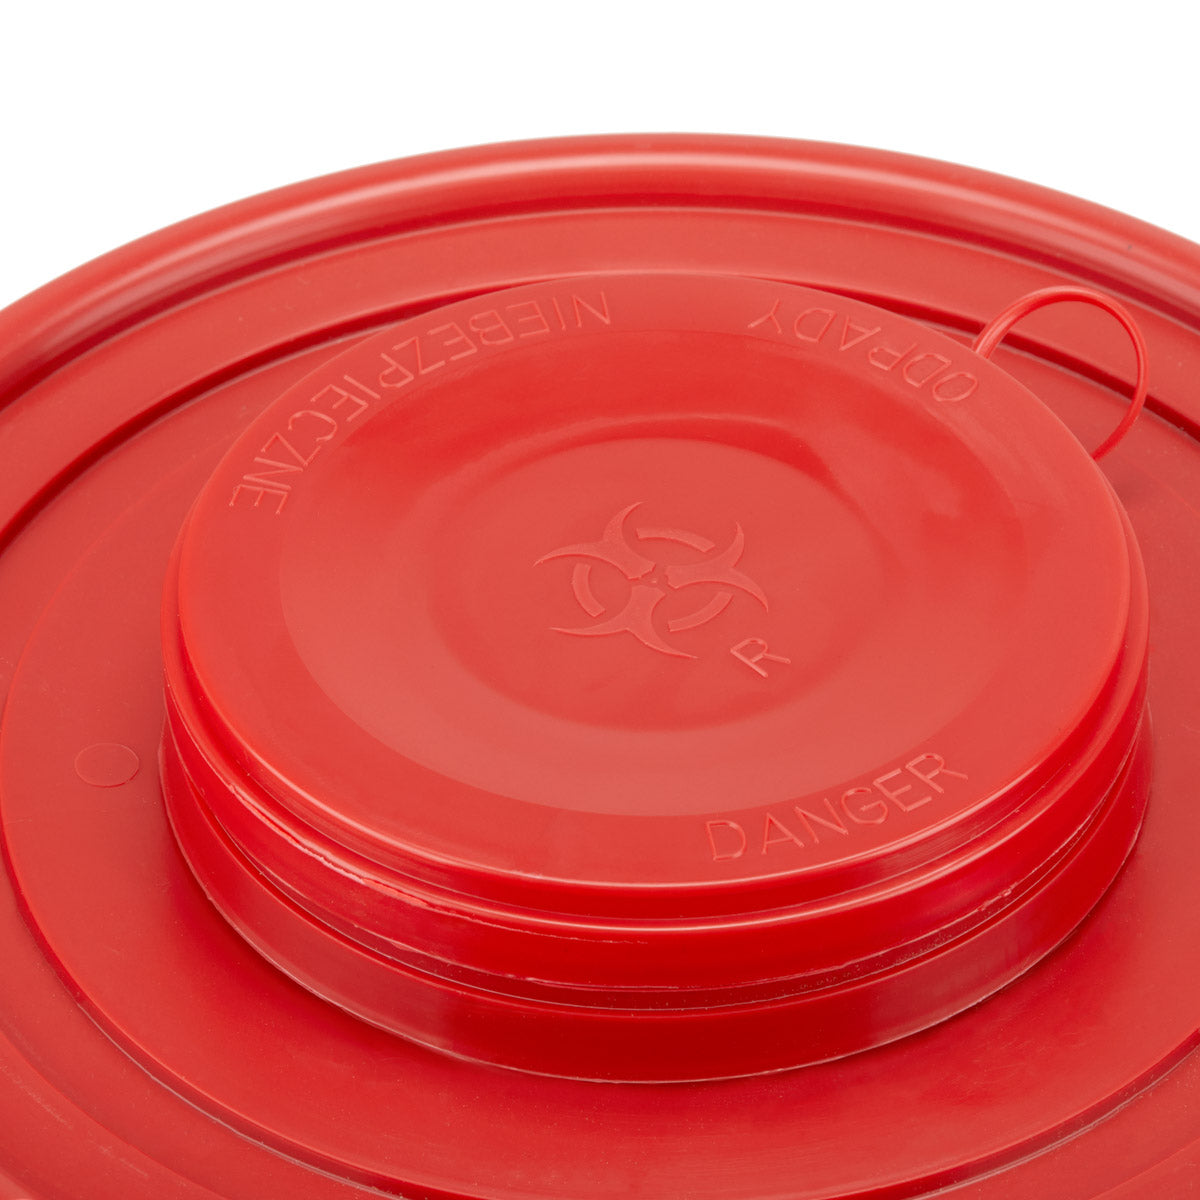 5 L RED MEDICAL WASTE CONTAINER